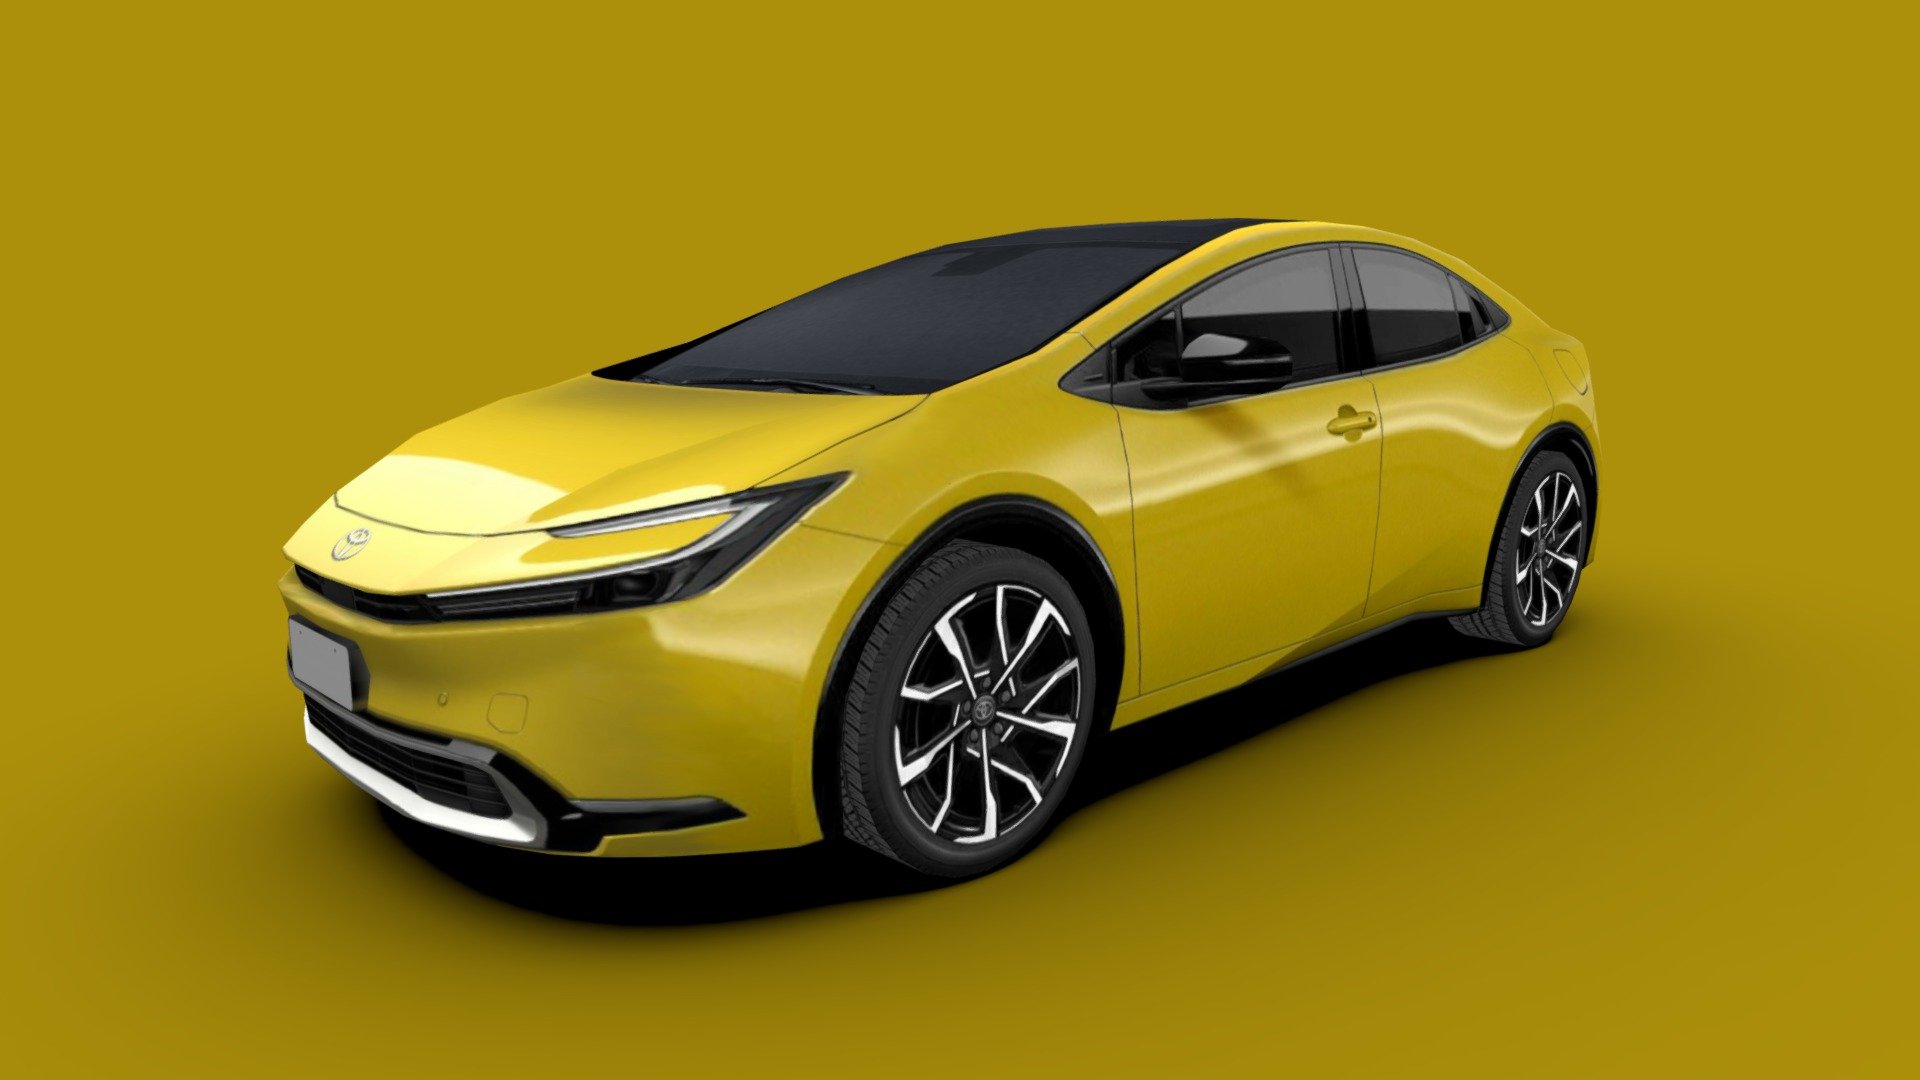 3d model of the 2023 Toyota Prius, a plug-in hybrid, 5-door, liftback, mid-size car.

The model is very low-poly, full-scale, real photos texture (single 2048 x 2048 png).

Package includes 5 file formats and texture (3ds, fbx, dae, obj and skp)

Hope you enjoy it.

José Bronze - Toyota Prius 2023 - Buy Royalty Free 3D model by Jose Bronze (@pinceladas3d) 3d model